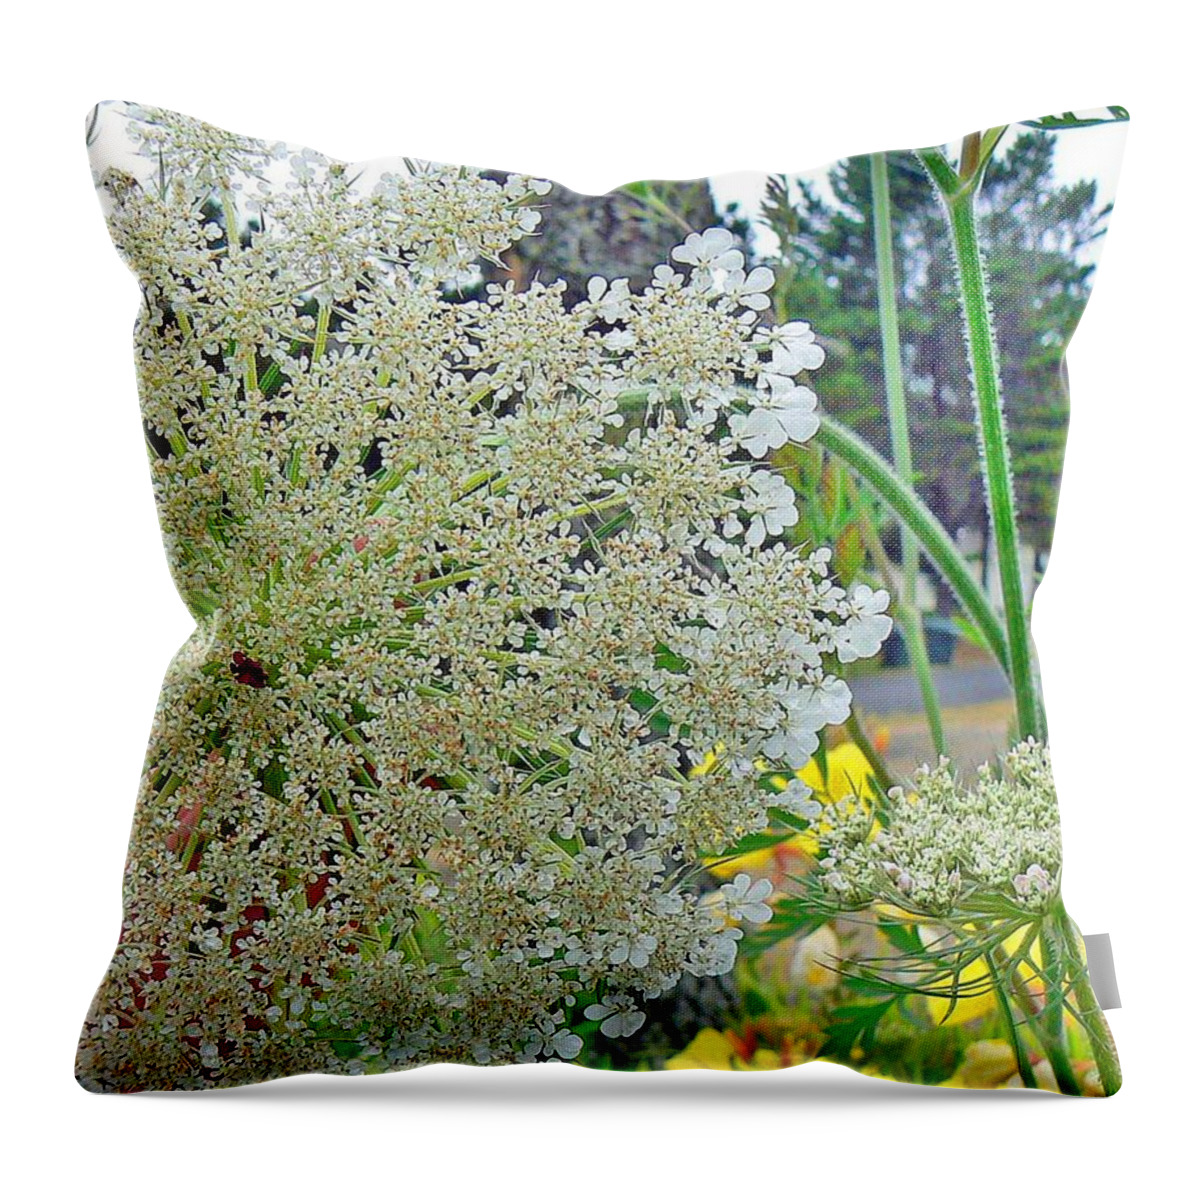 Pamela Patch Throw Pillow featuring the photograph Queen Anne's Lace by Pamela Patch